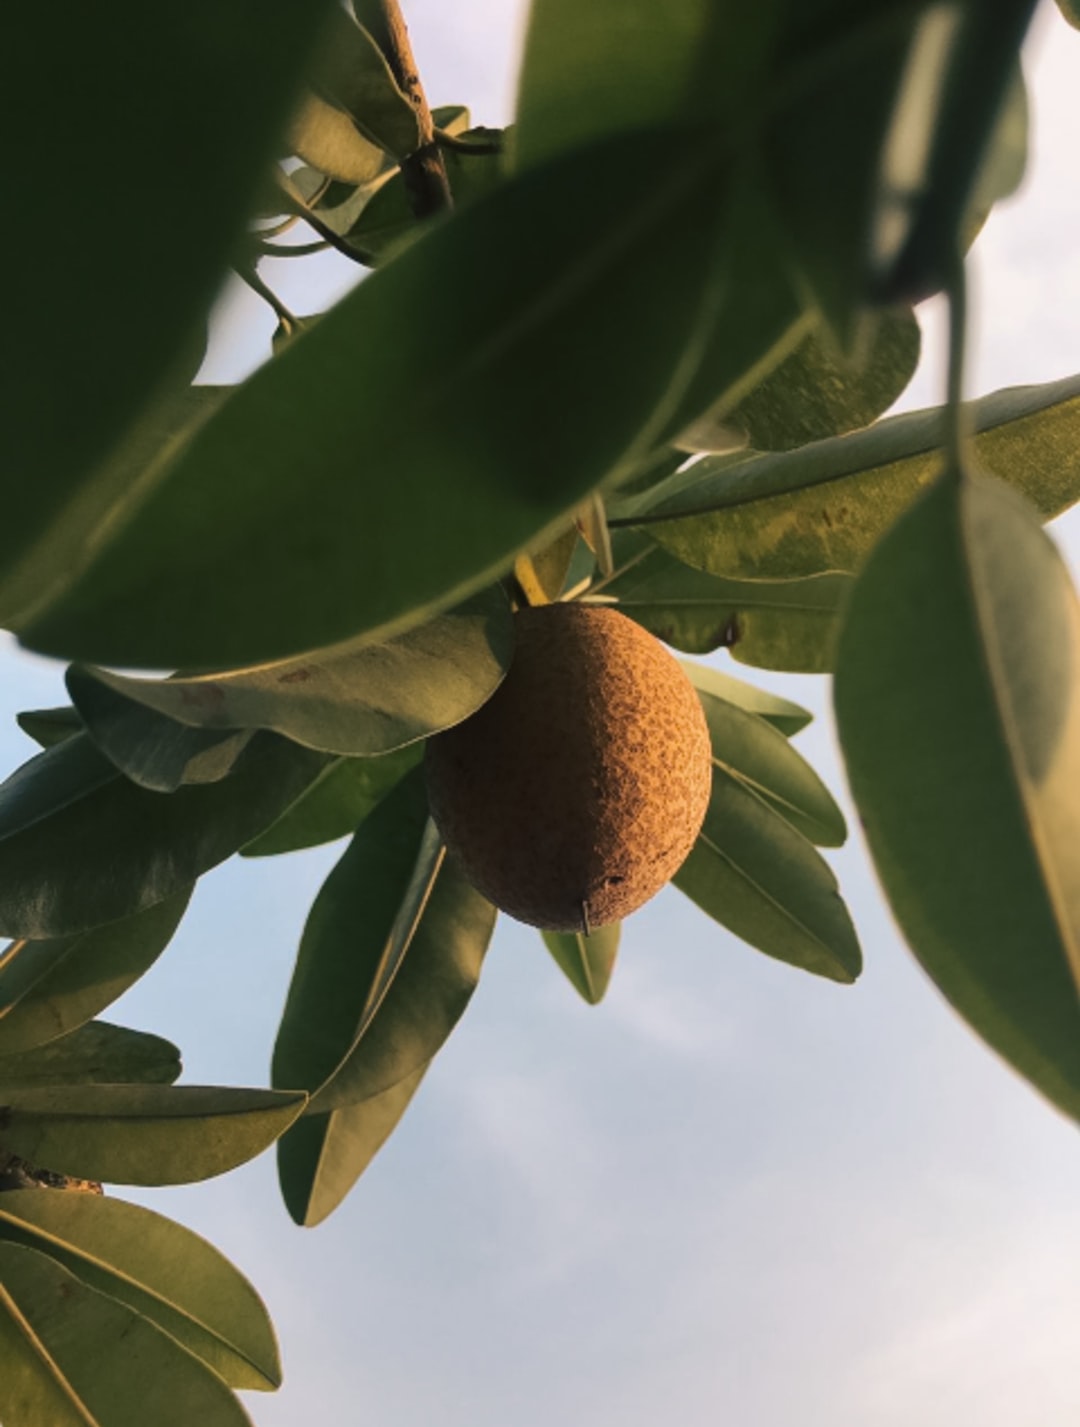 a fruit hanging from a tree branch with sky in the background